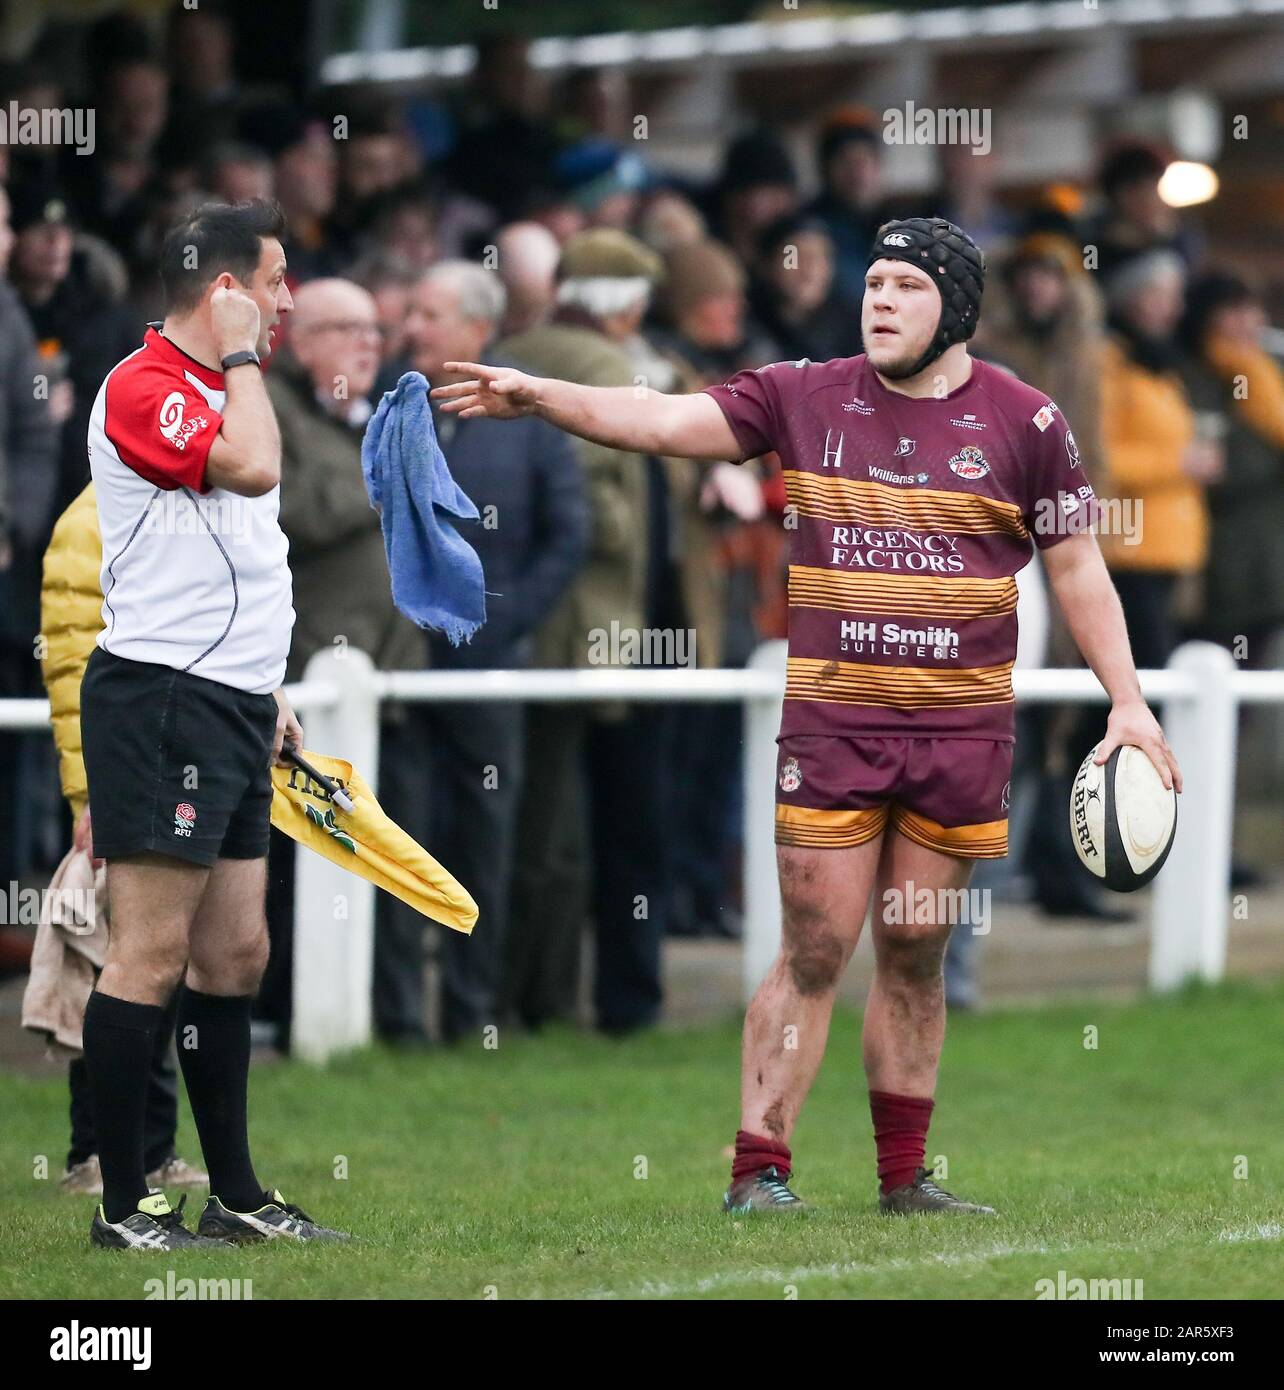 25.01.2020, Hinckley, Leicester, England. Rugby Union, Hinckley rfc v Sedgley Park rfc.   Thomas Coe in action for Sedgley Park during the RFU National League 2 North (NL2N) game played at the Leicester  Road Stadium. Stock Photo